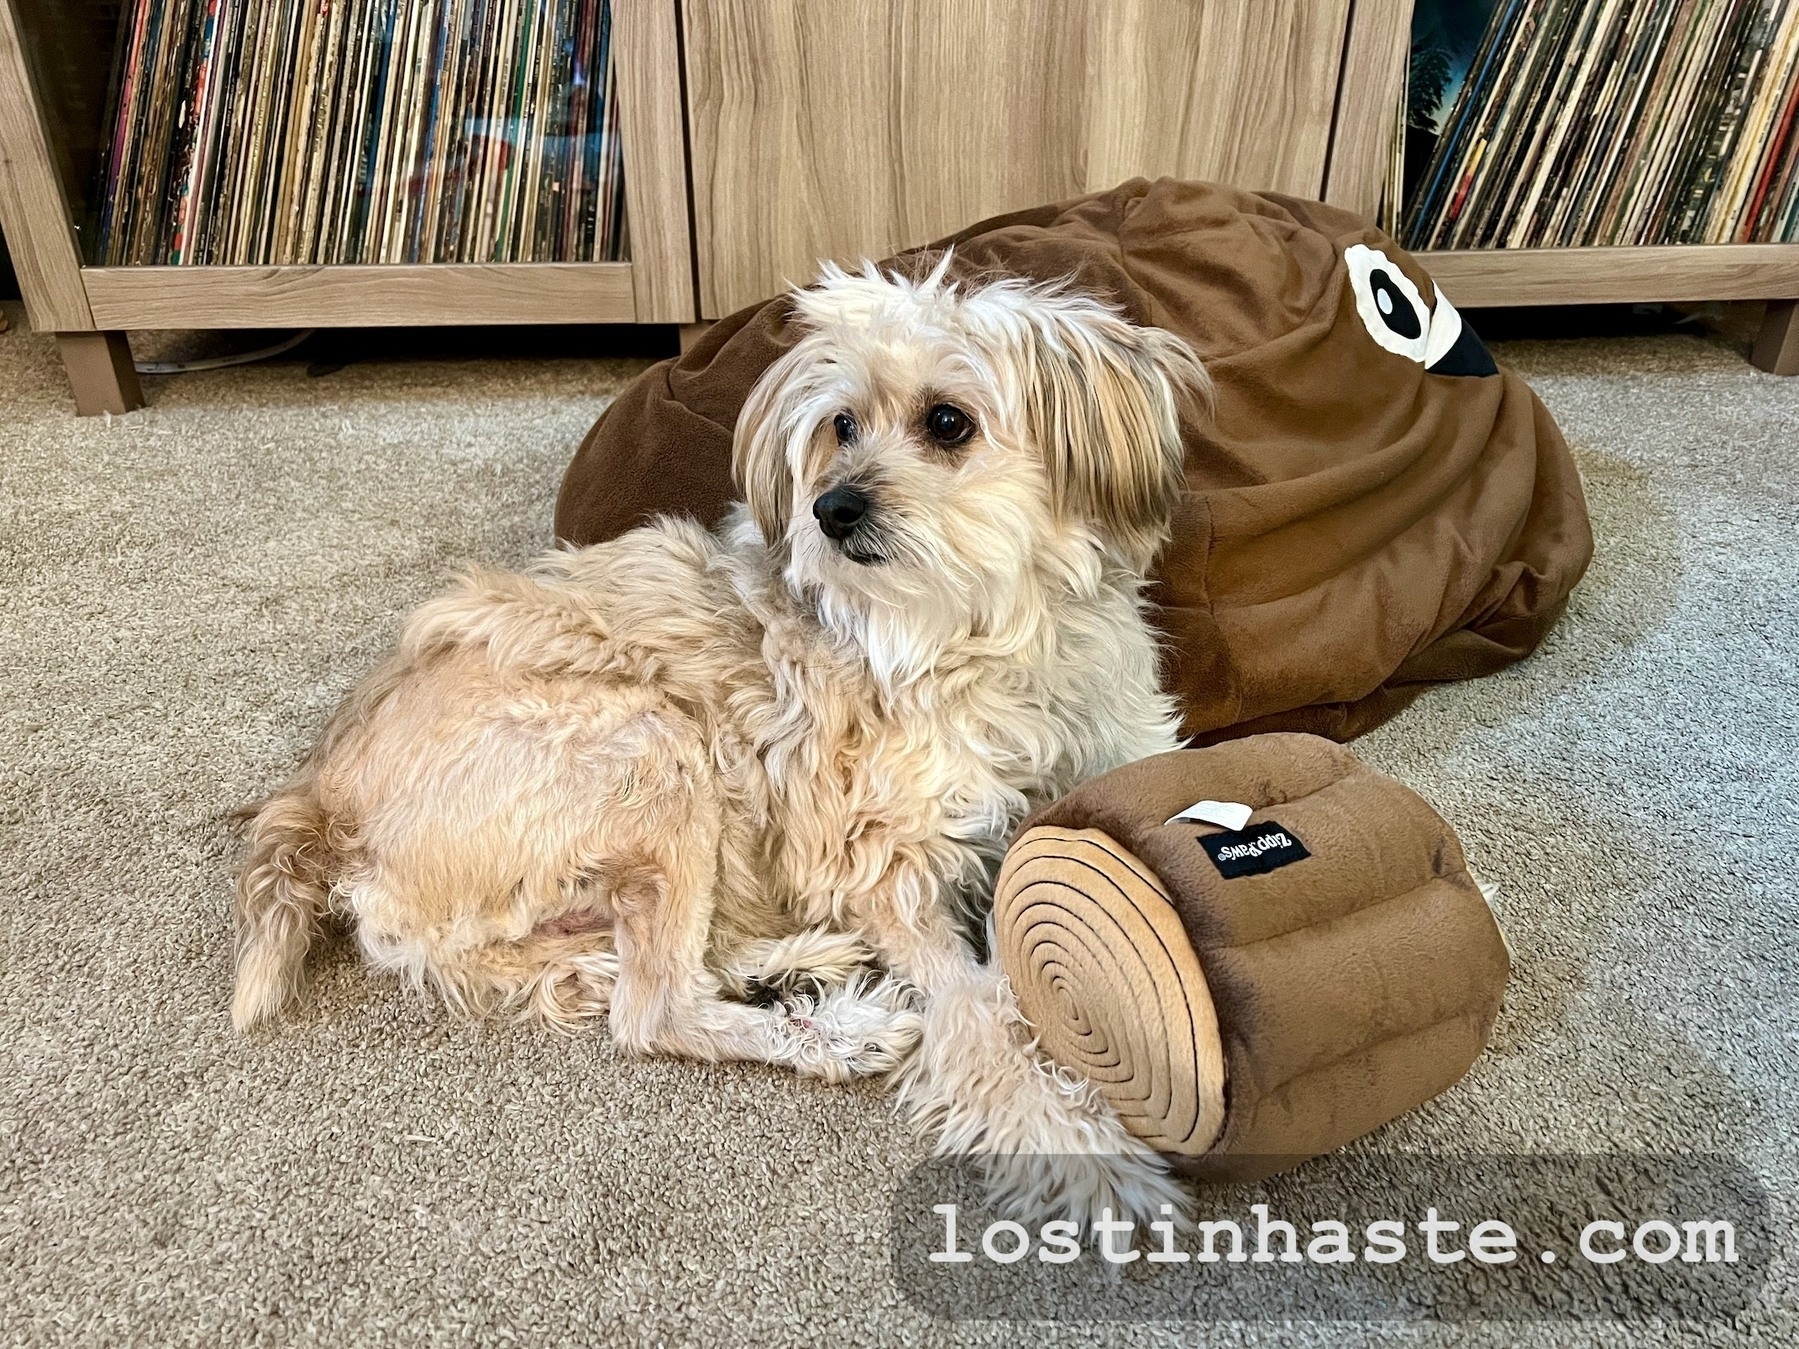 A small dog rests beside a cinched plush toy resembling a log, in a room with a record collection.